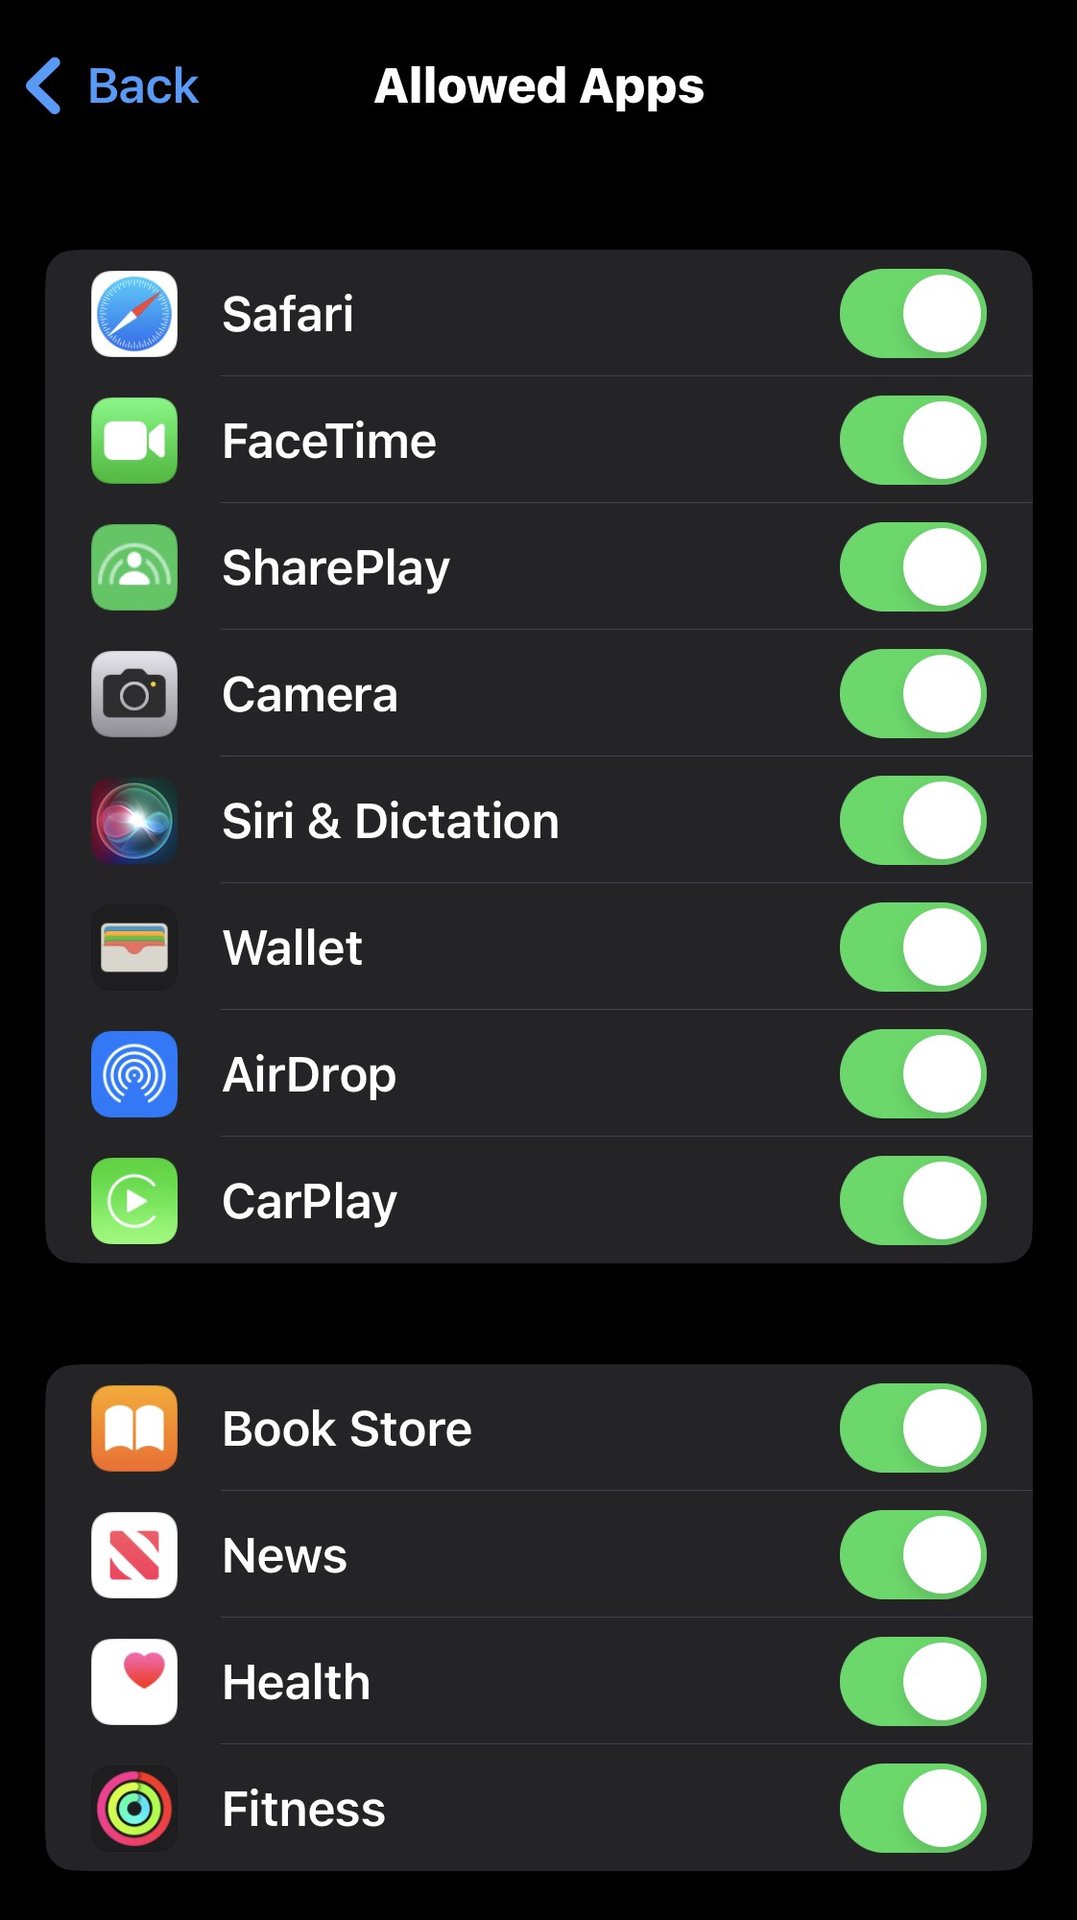 iphone allowed apps full list parental controls